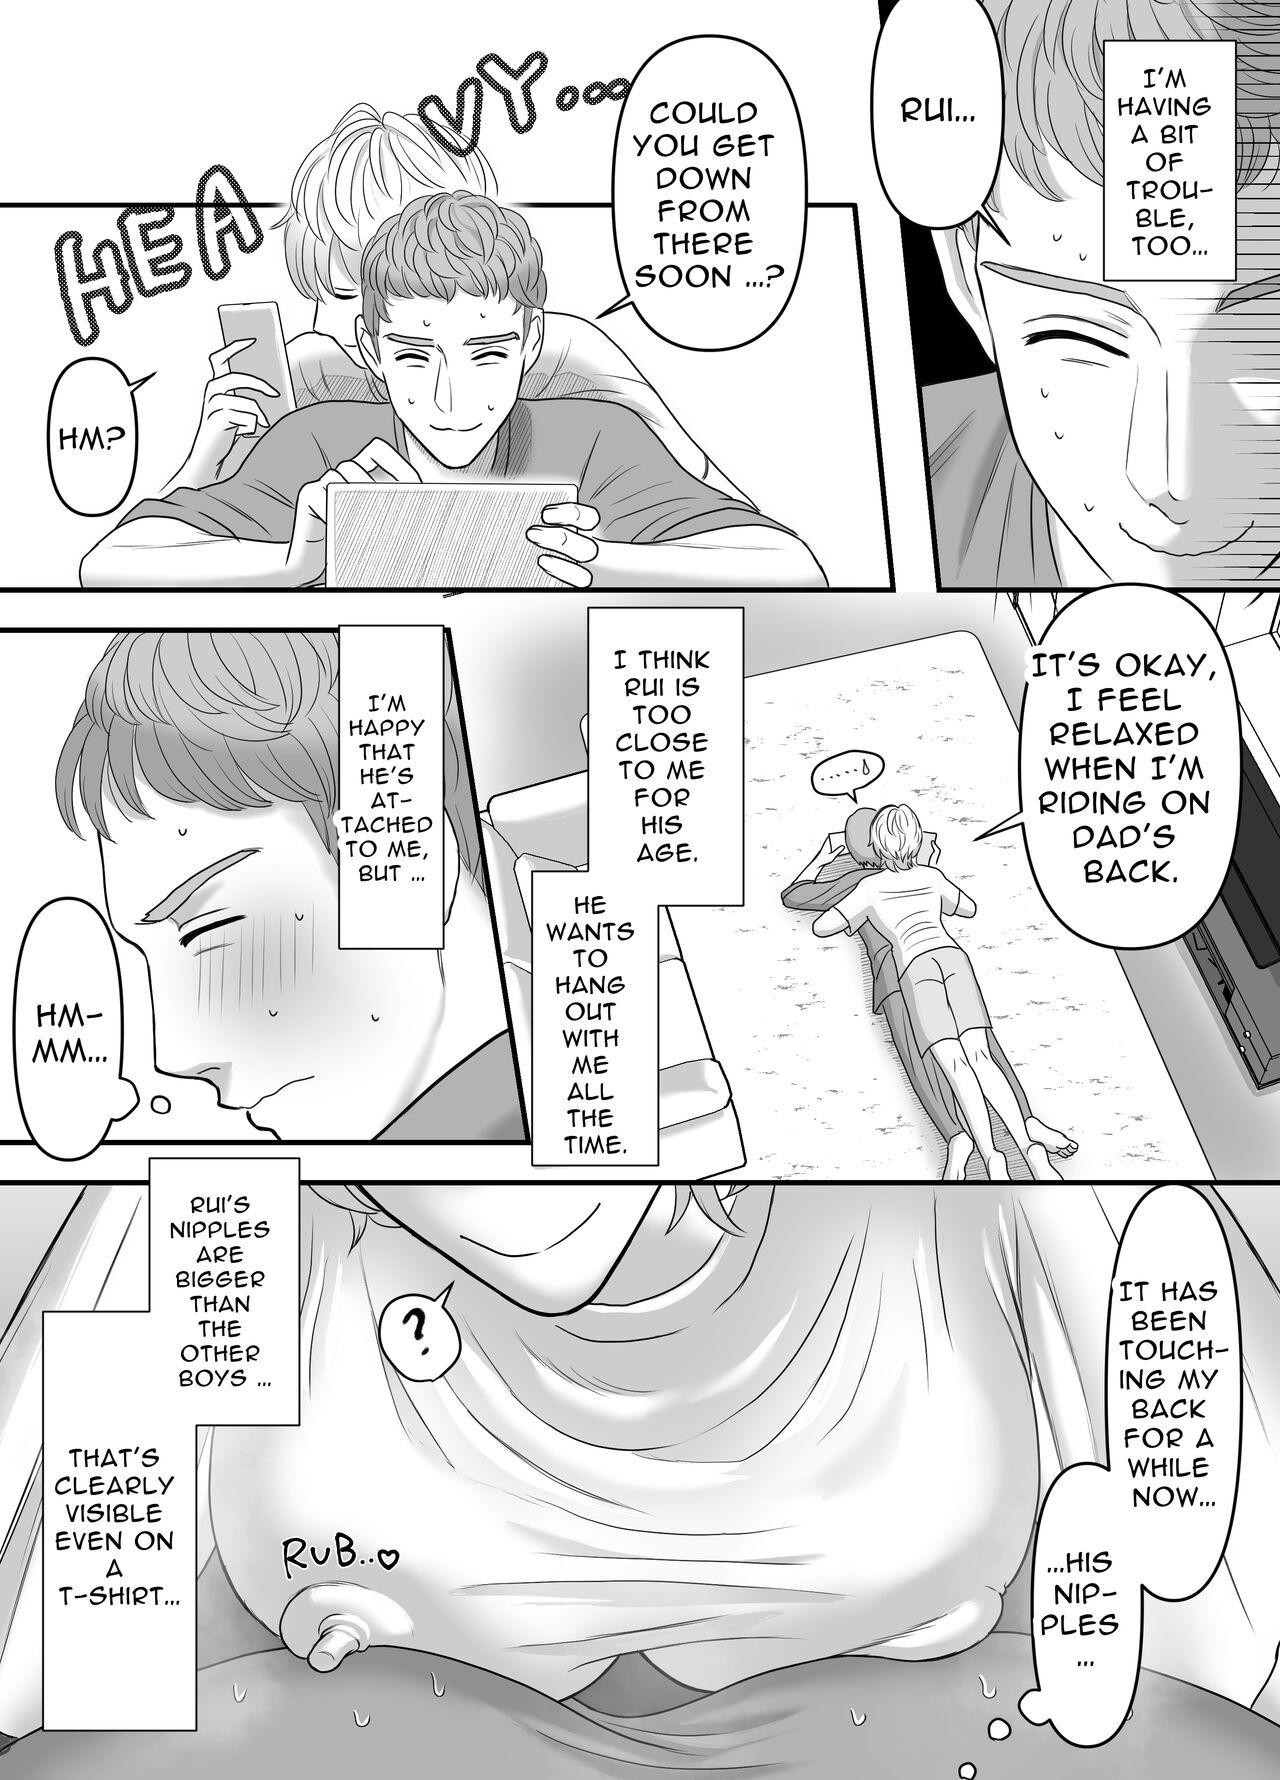 Gay Handjob A story about crossing the line with a son who loves his dad Plump - Page 4